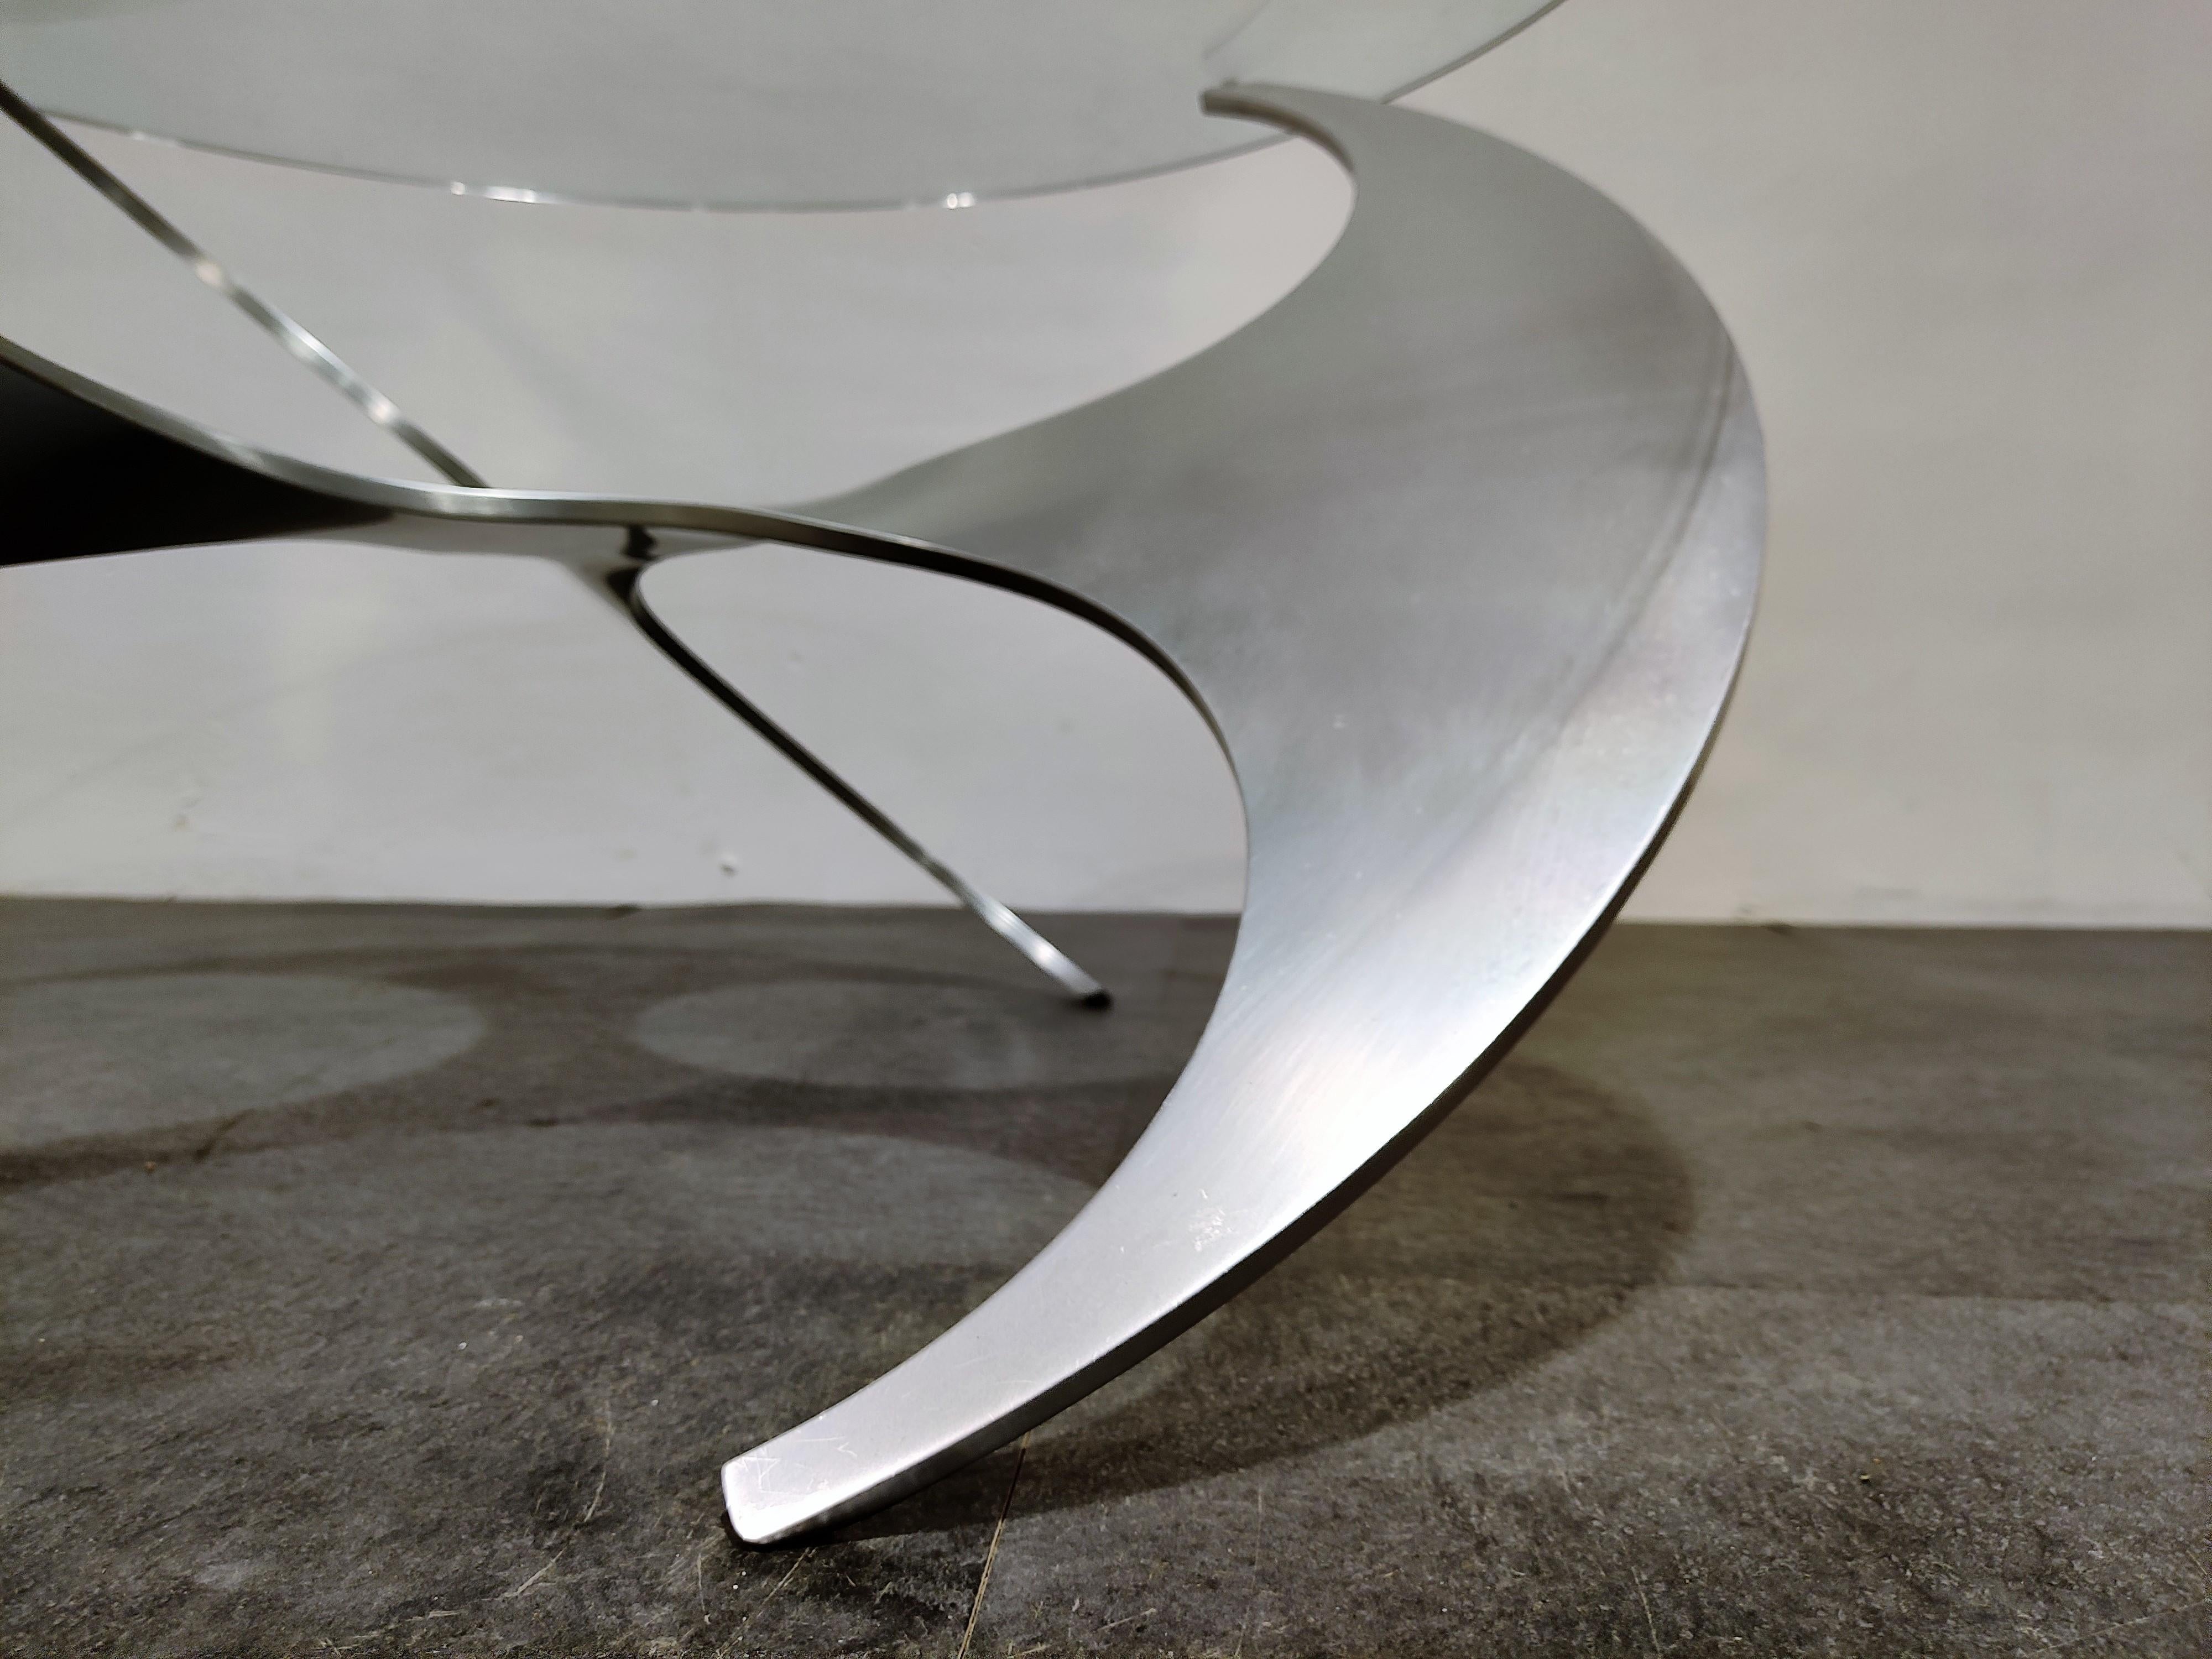 Midcentury 'propellor' coffee table by Knut Hesterberg for Ronald Schmitt.

The table has a clear round glass top with a sculptural aluminium base.

The table is in good original condition.

1960s, Germany

Size: Height 49cm/19.29